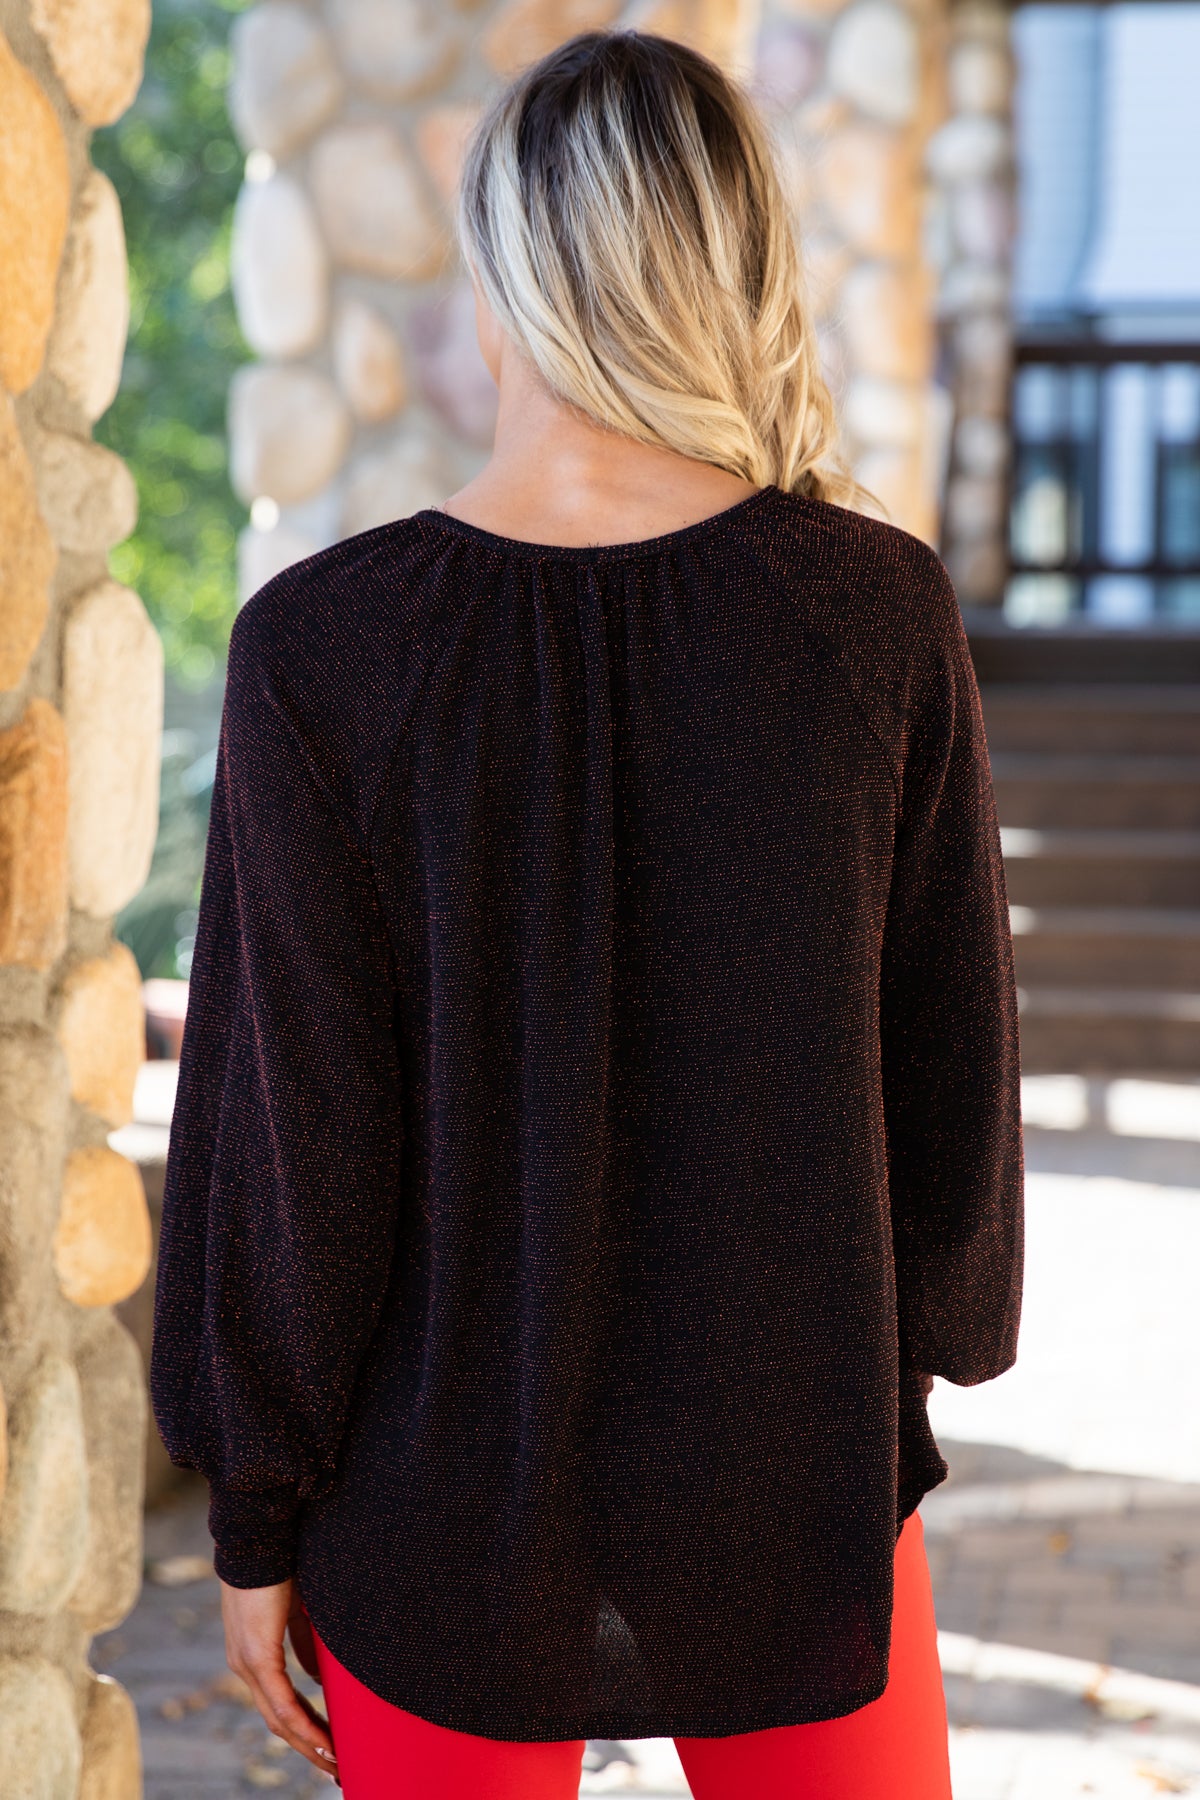 Black Shimmer Long Sleeve Top - Filly Flair